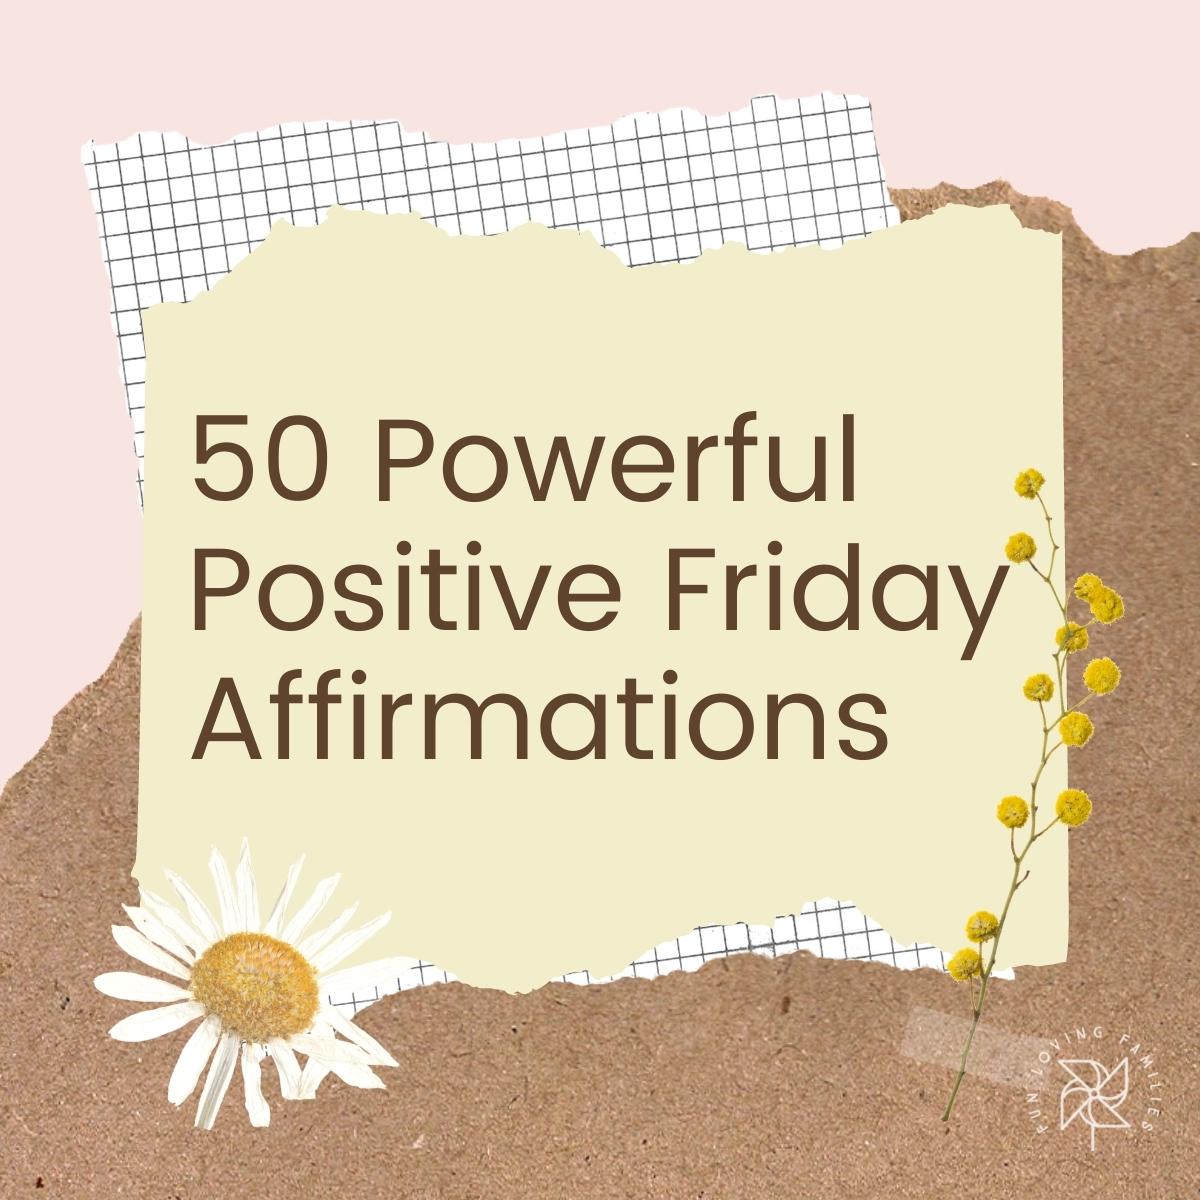 50 Powerful Positive Friday Affirmations